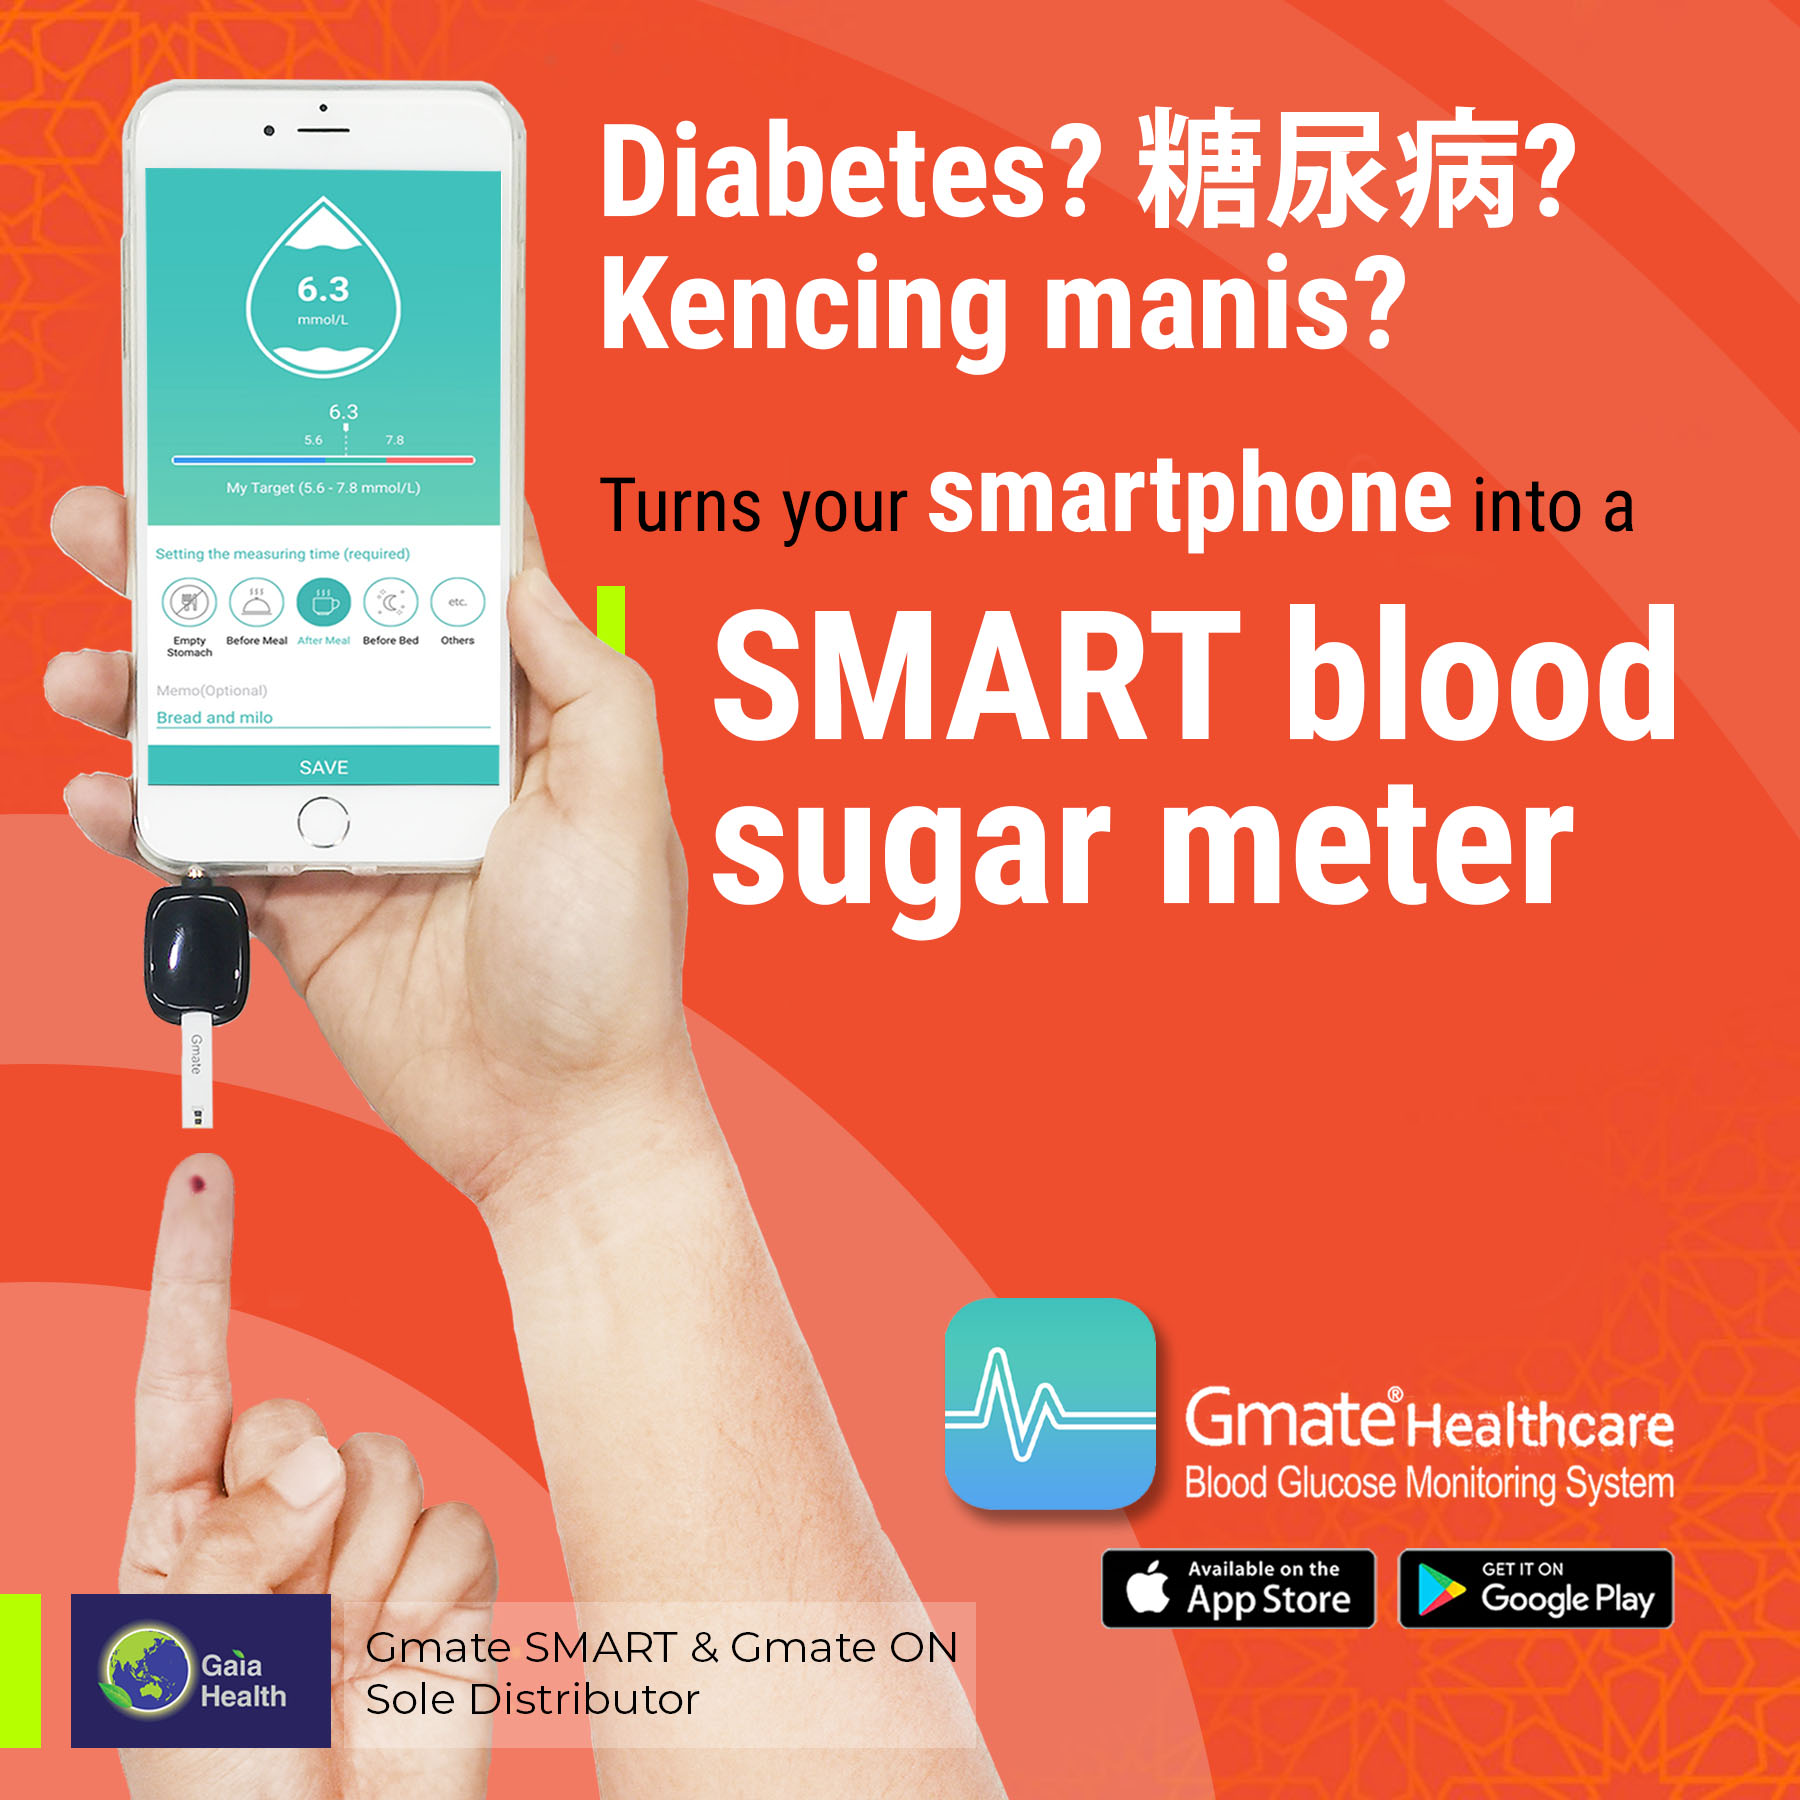 GMATE BLOOD GLUCOSE MONITORING SYSTEM